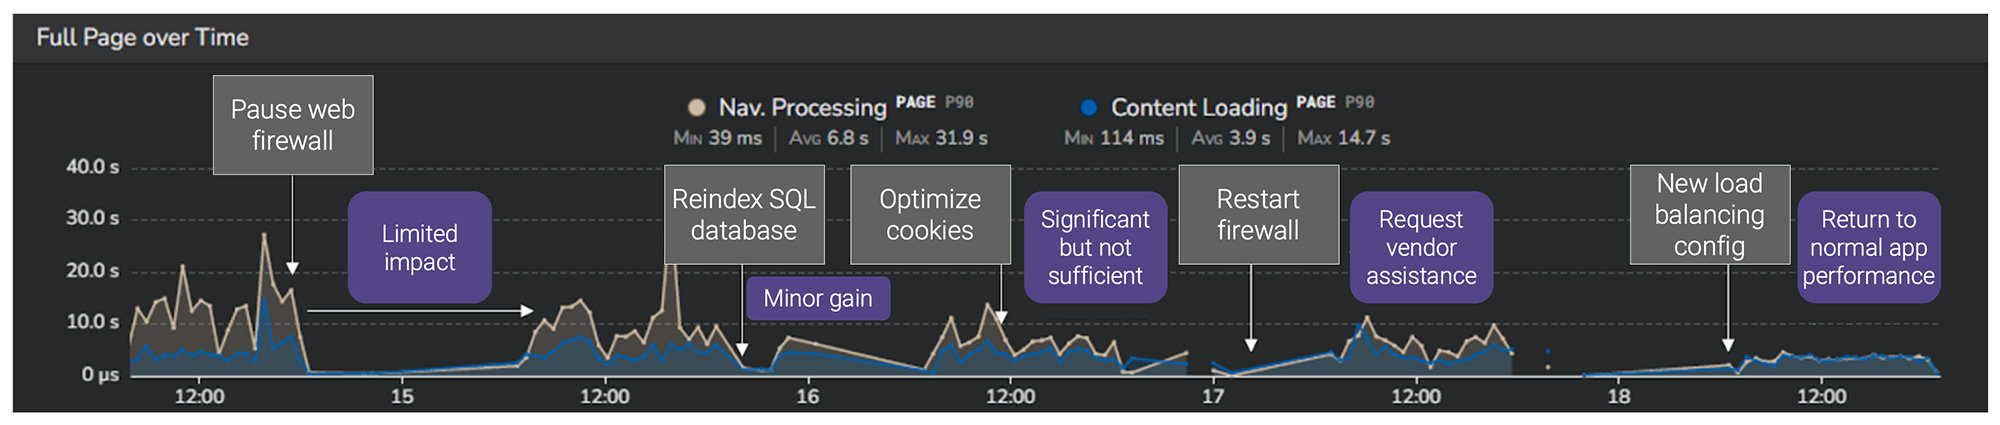 Optimal SaaS Application Performance Process using a Digital Experience Monitoring Solution